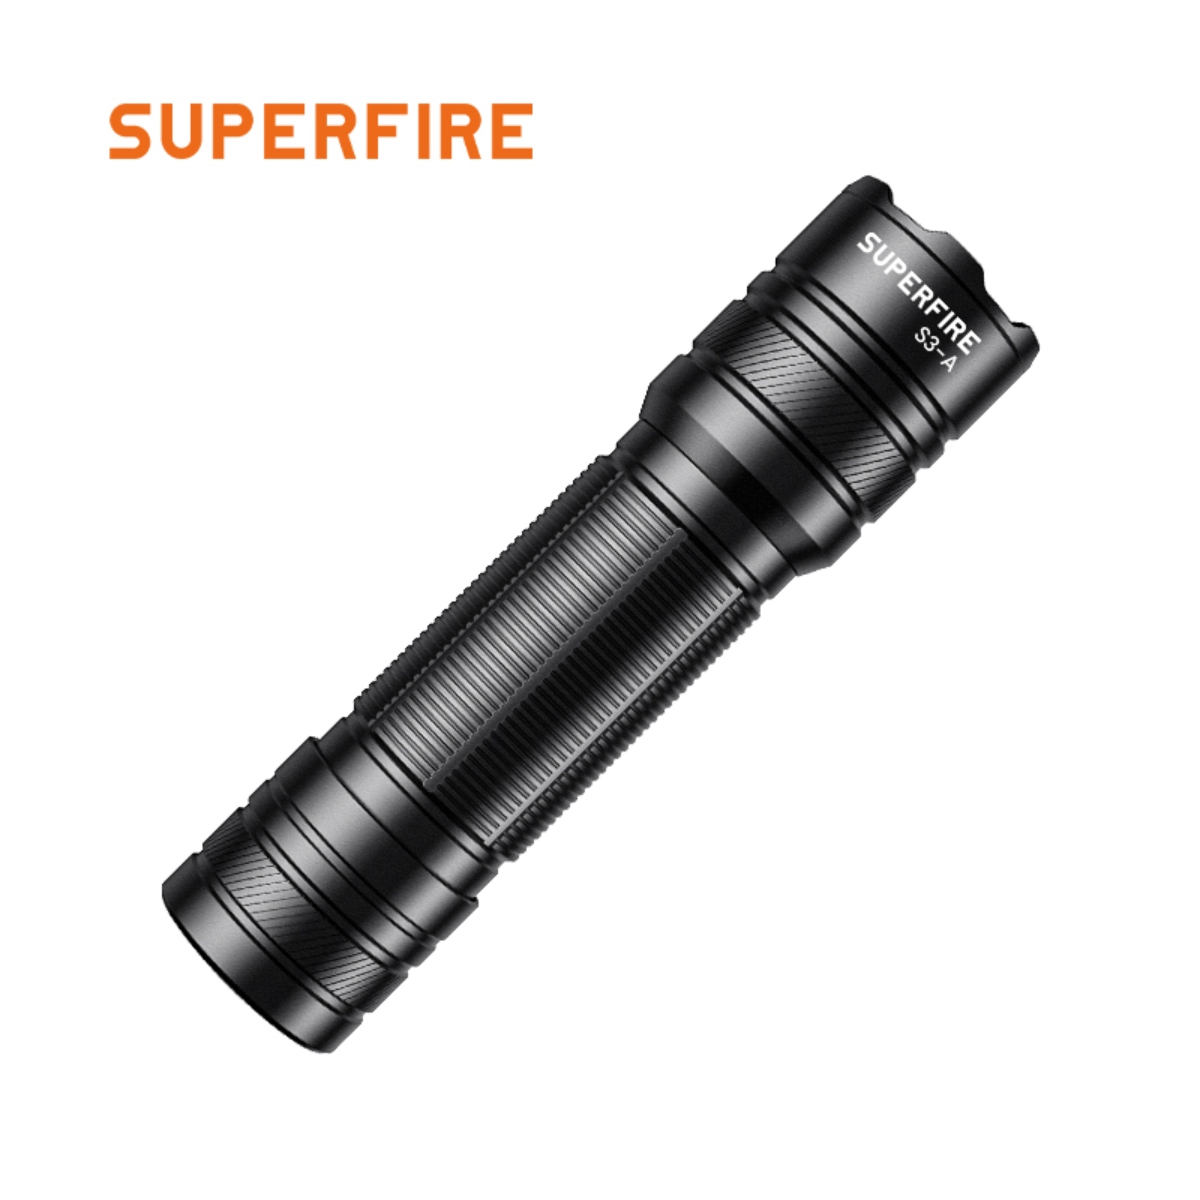 SUPERFIRE S3-A Zoomable Led Flashlight